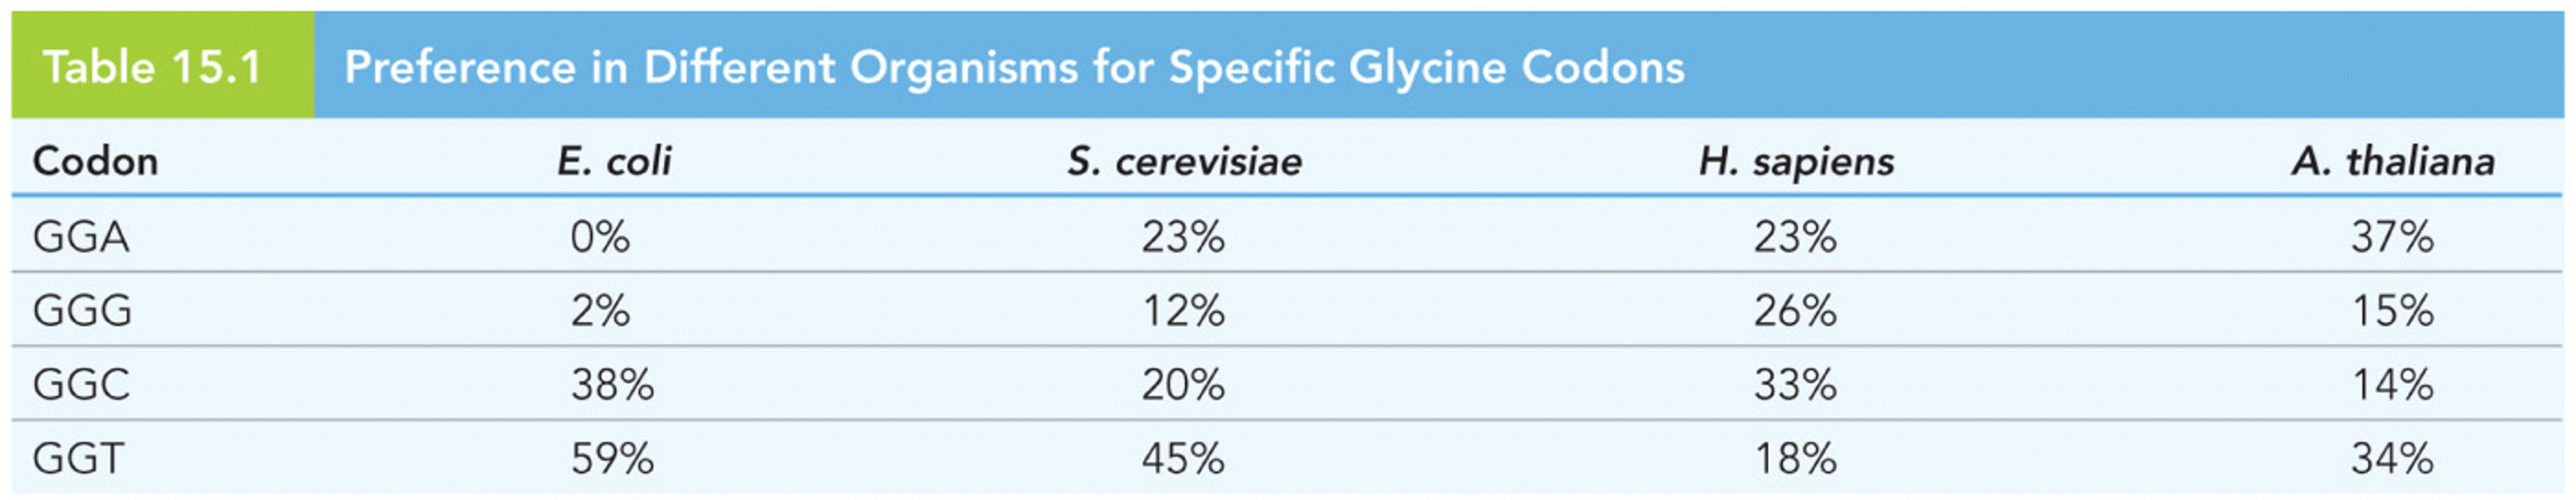 Preference in Different Organisms for Specific Glycine Codons